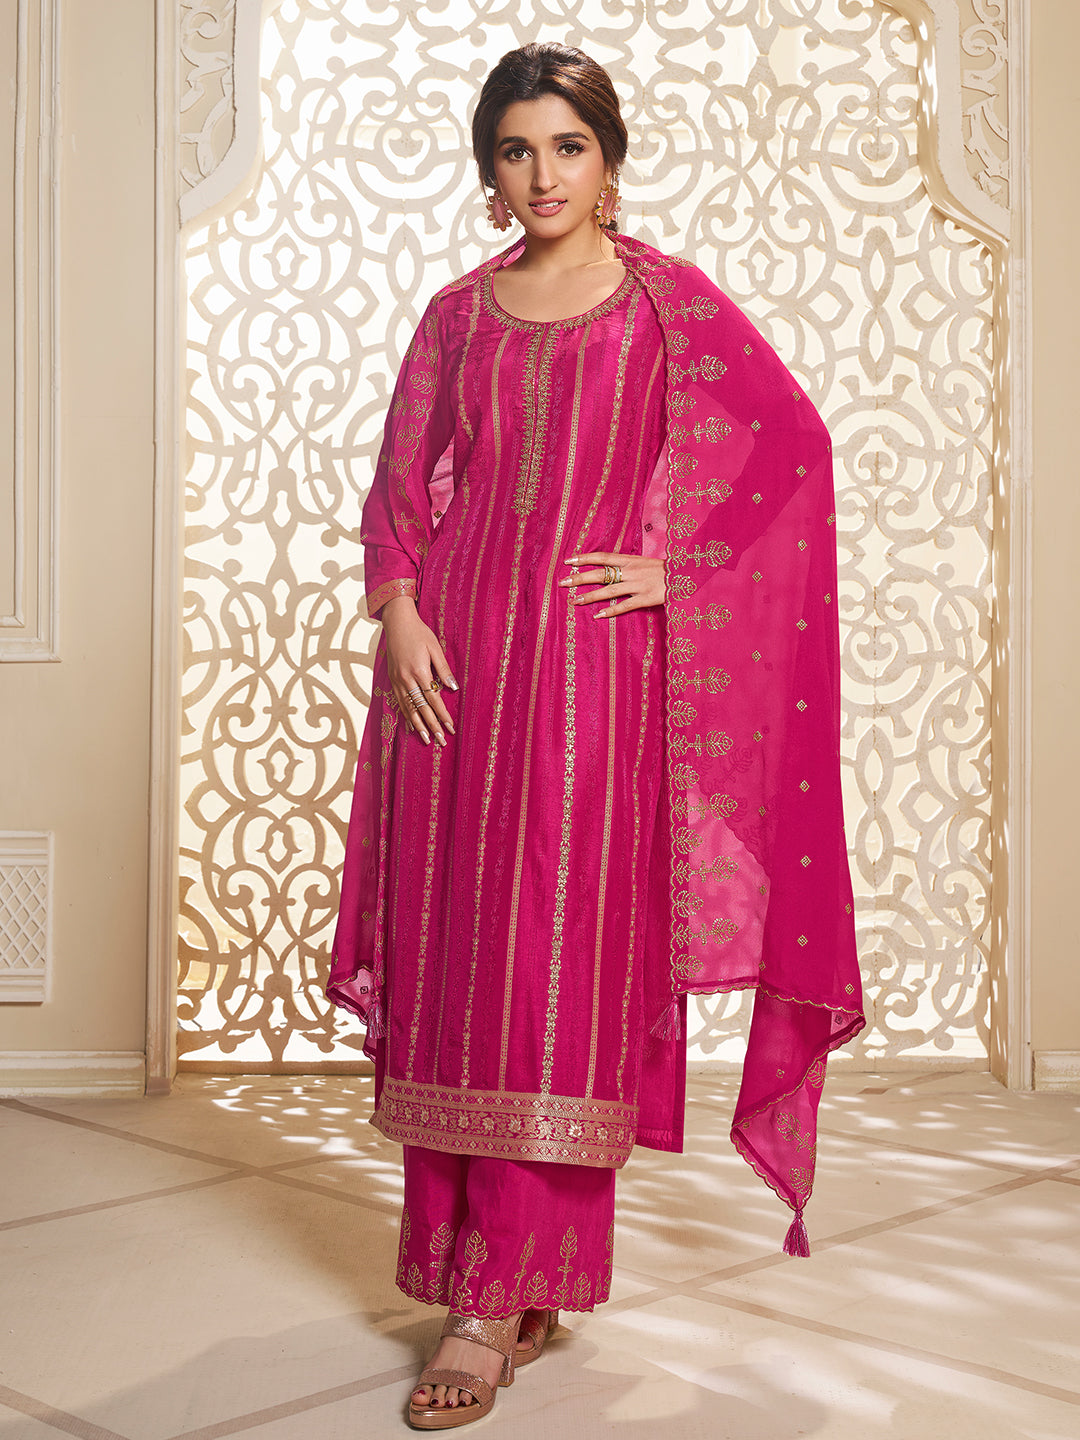 Hot Pink Dola Silk Palazzo Suit Set with Zari and Self Weave Jacquard Top Product vendor